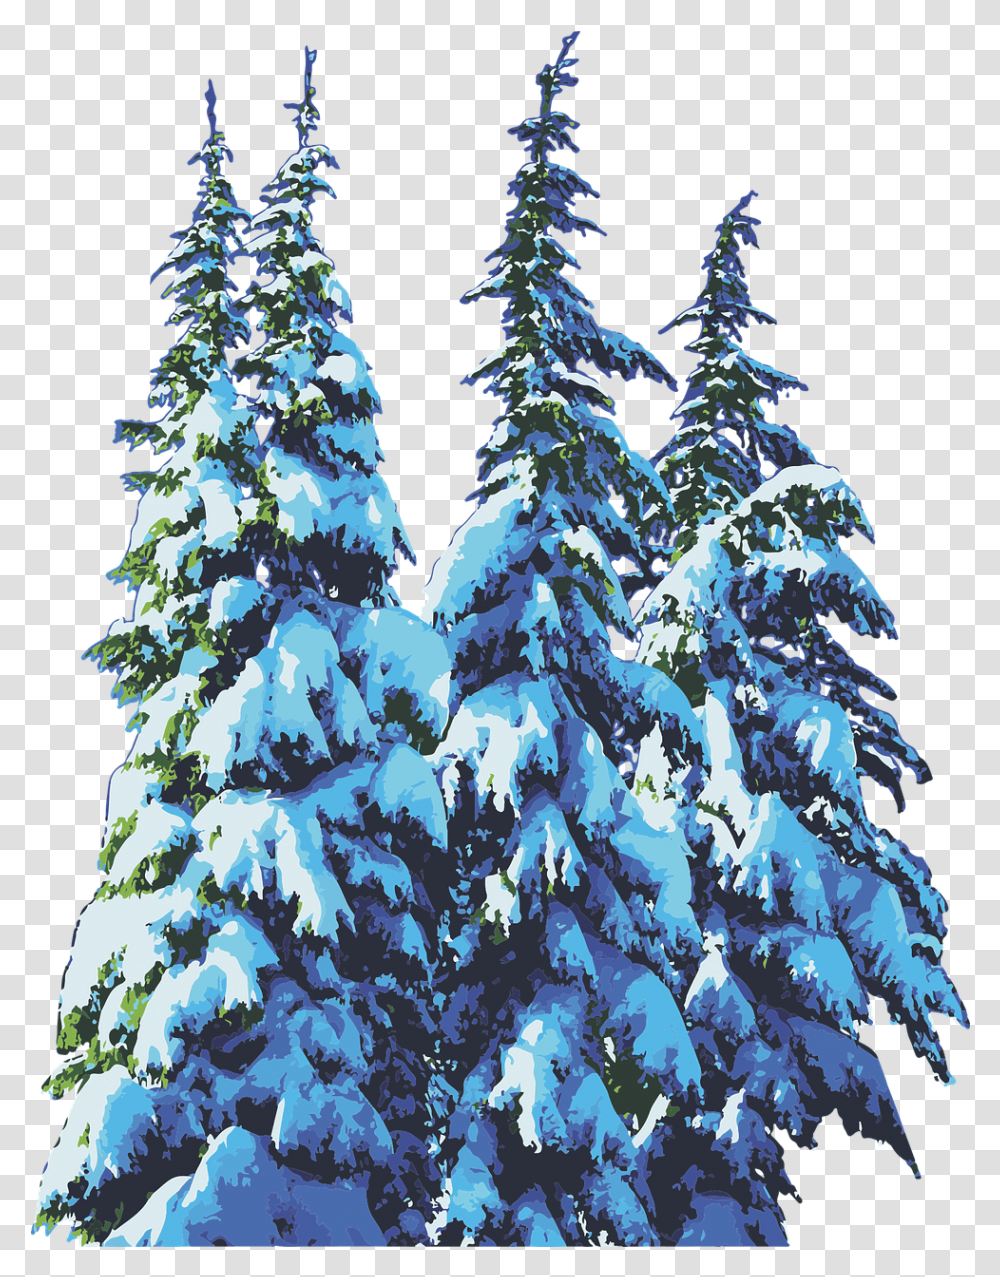 Pine Trees Snow Winter Free Vector Graphic On Pixabay Pine Trees Winter, Plant, Fir, Abies, Conifer Transparent Png